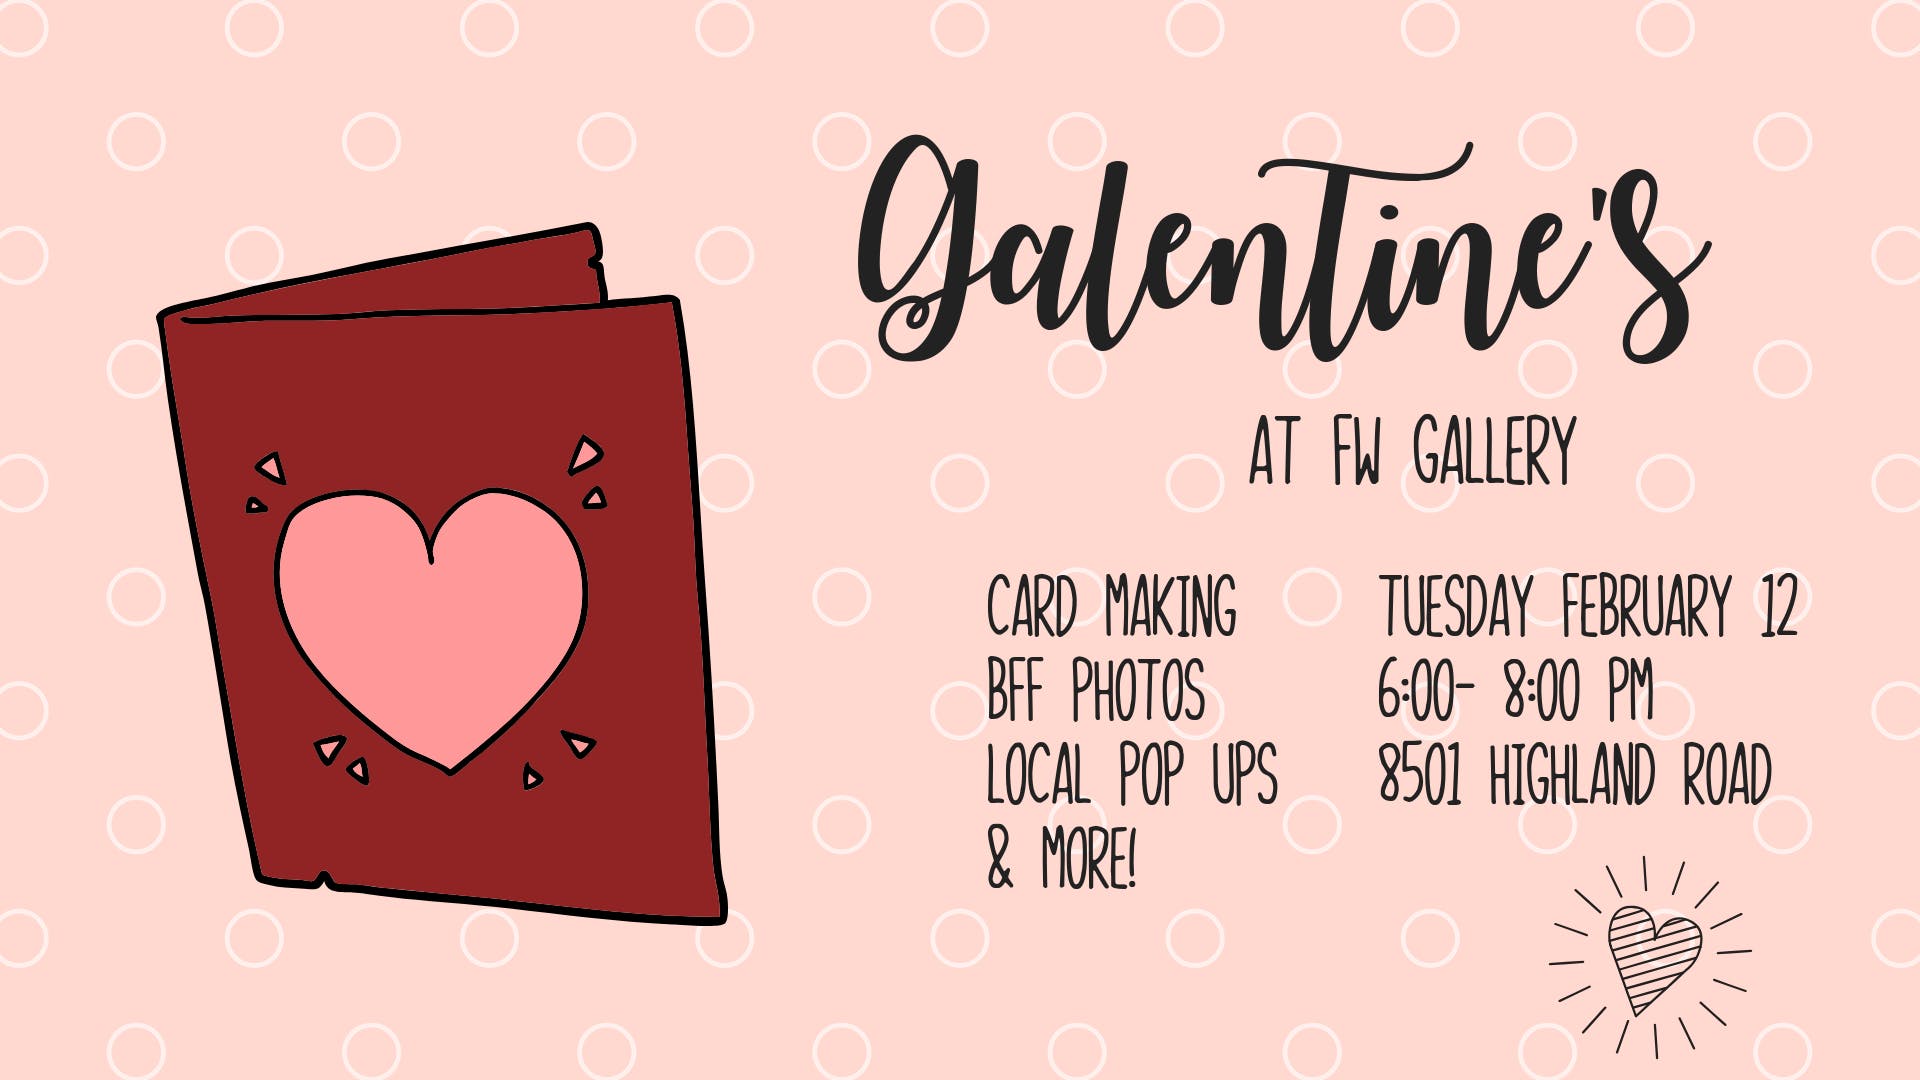 Galentine's Day at FW Gallery FEB 2019